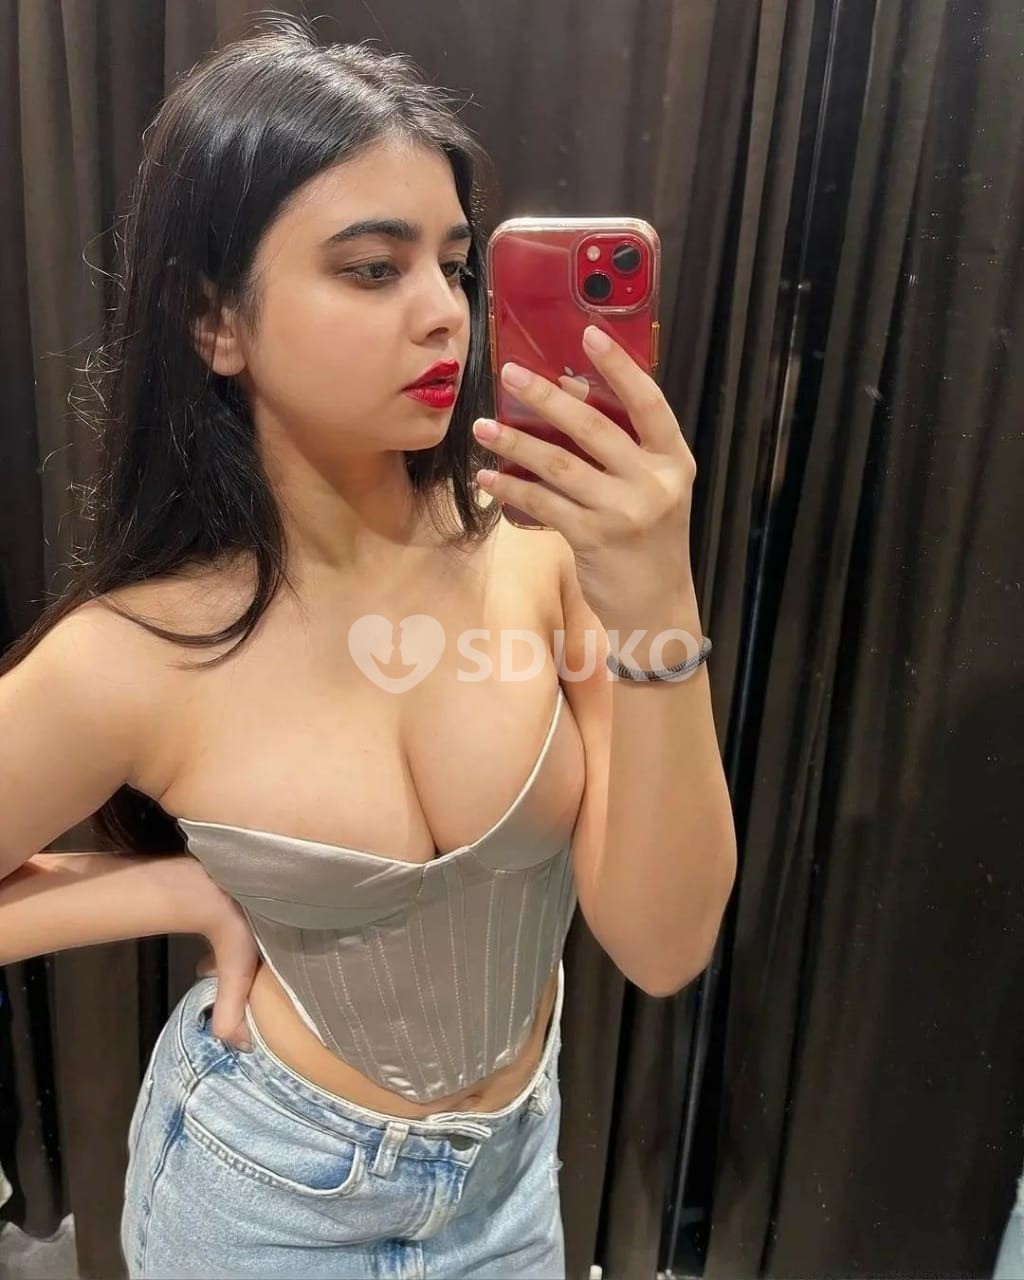 Electronic City VIP hot girl available all type sex genuine safe and secure service high profiles